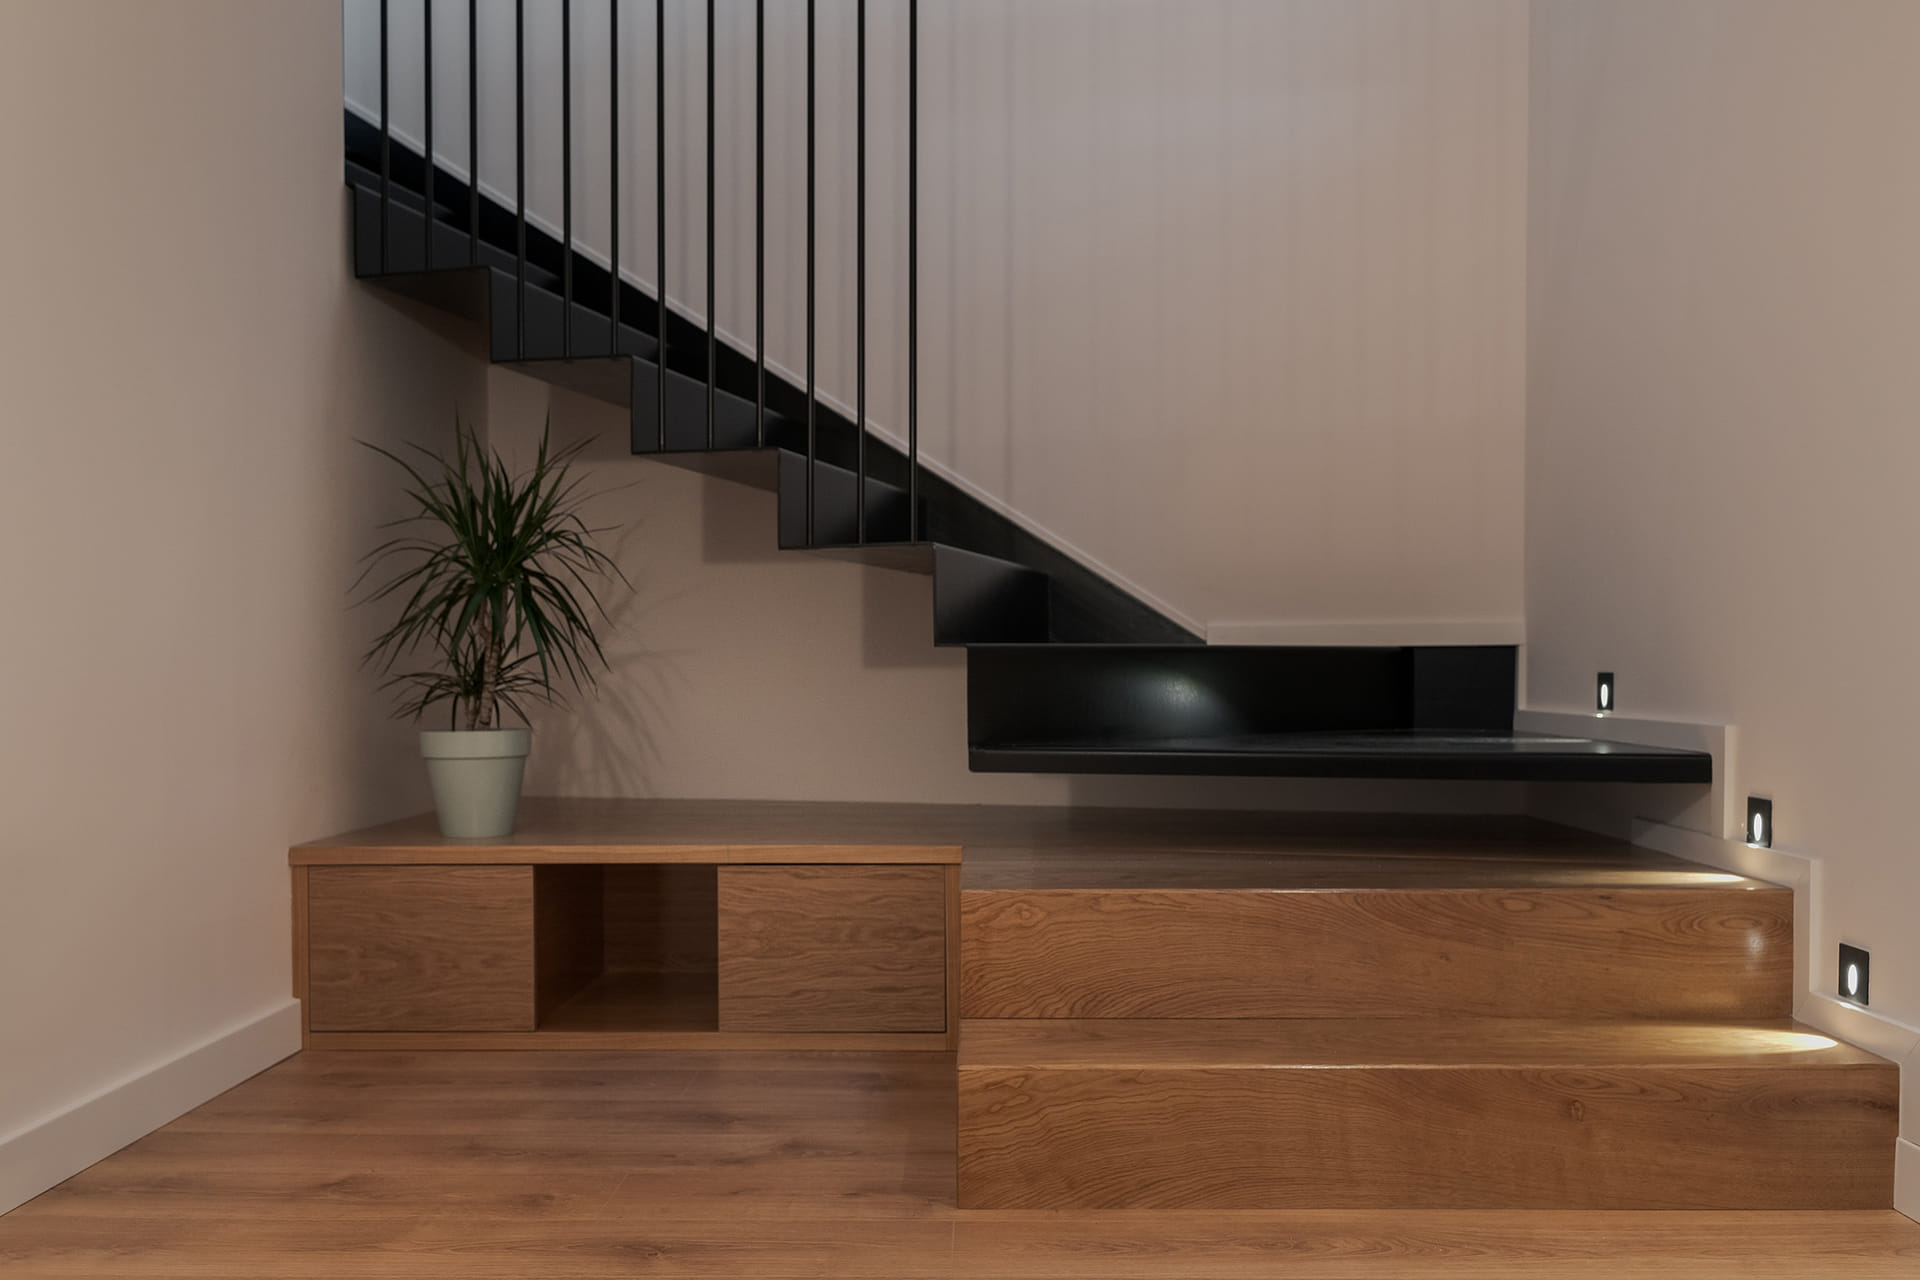 Stair access in wood and black.